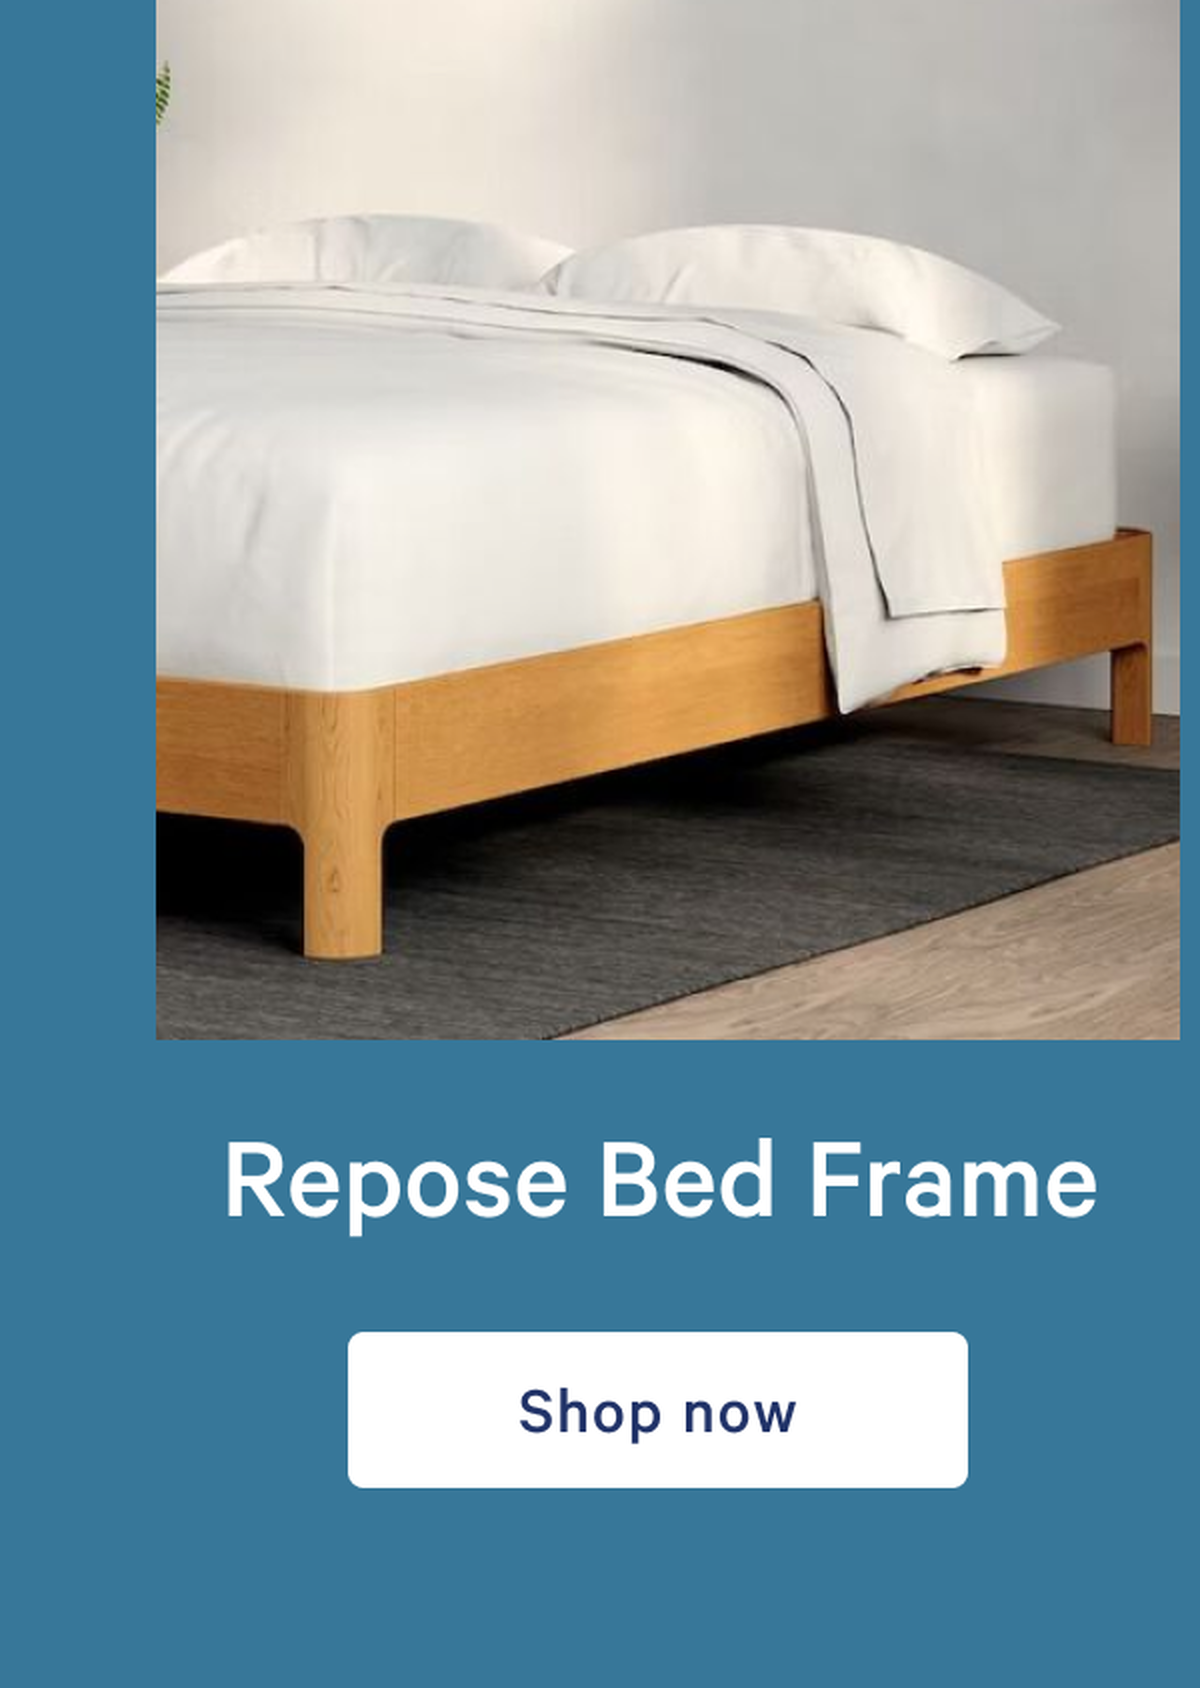 Repose Bed Frame >> Shop now >>